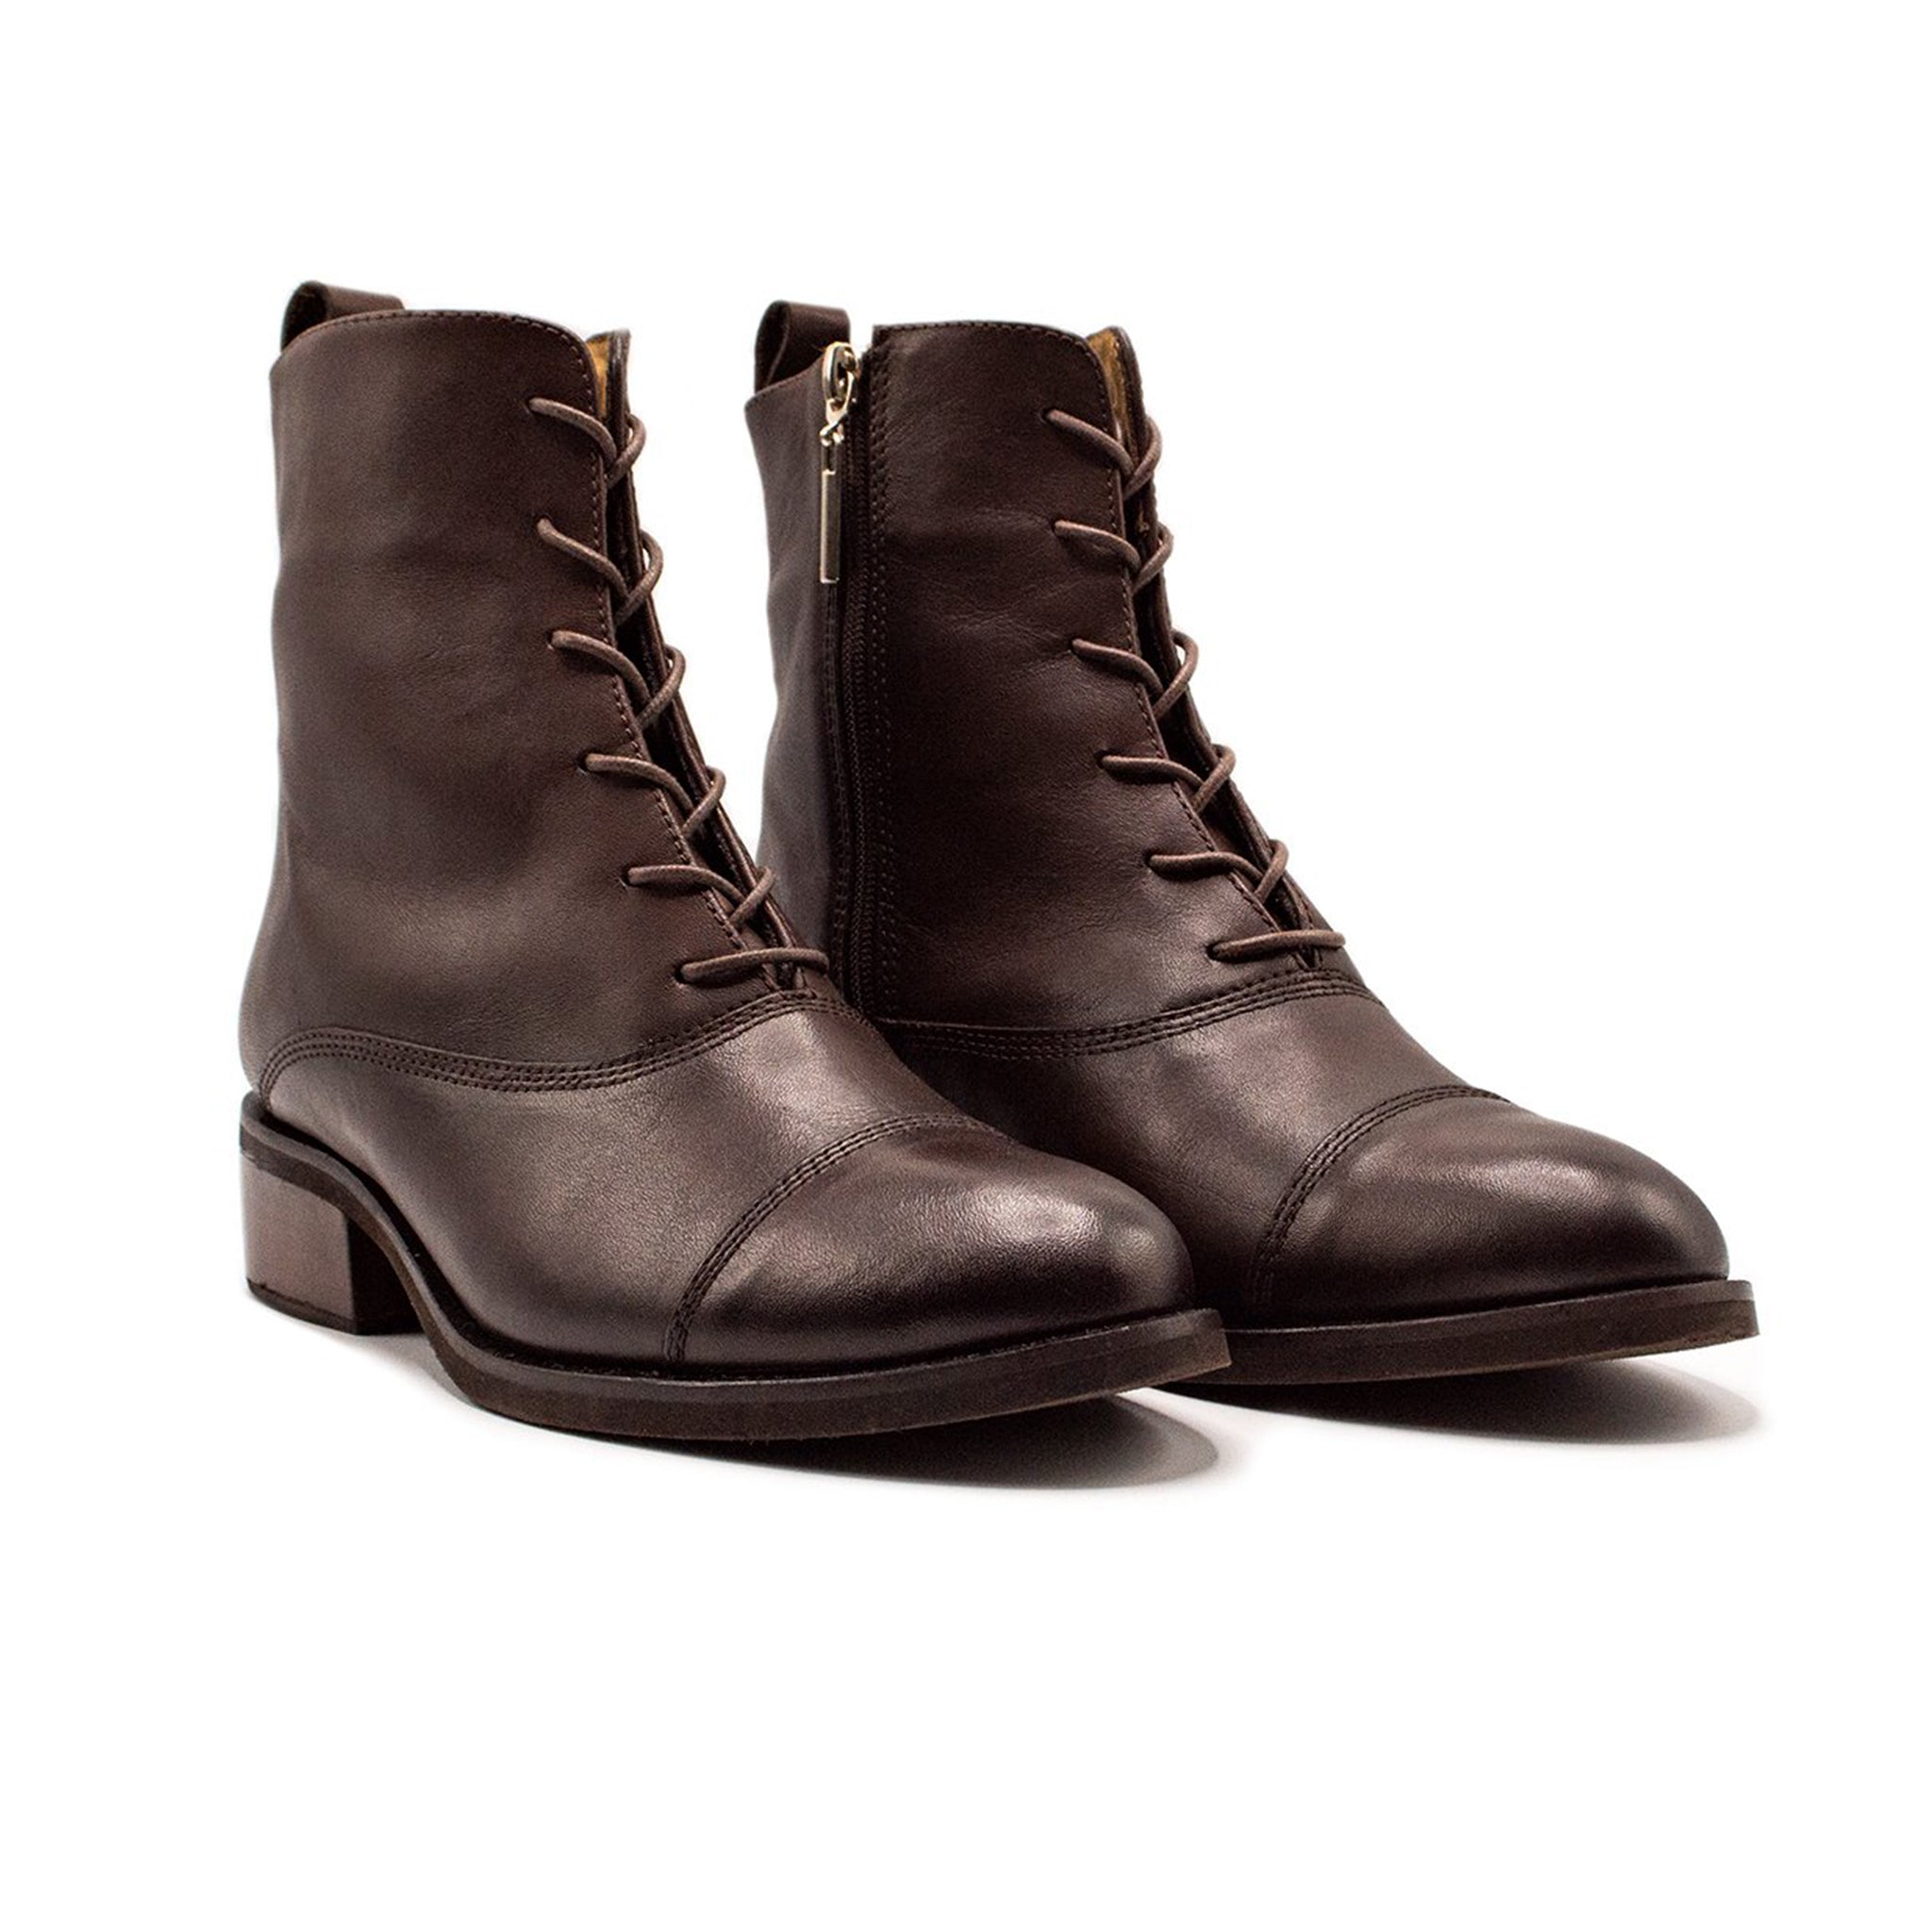 slim lace up boots